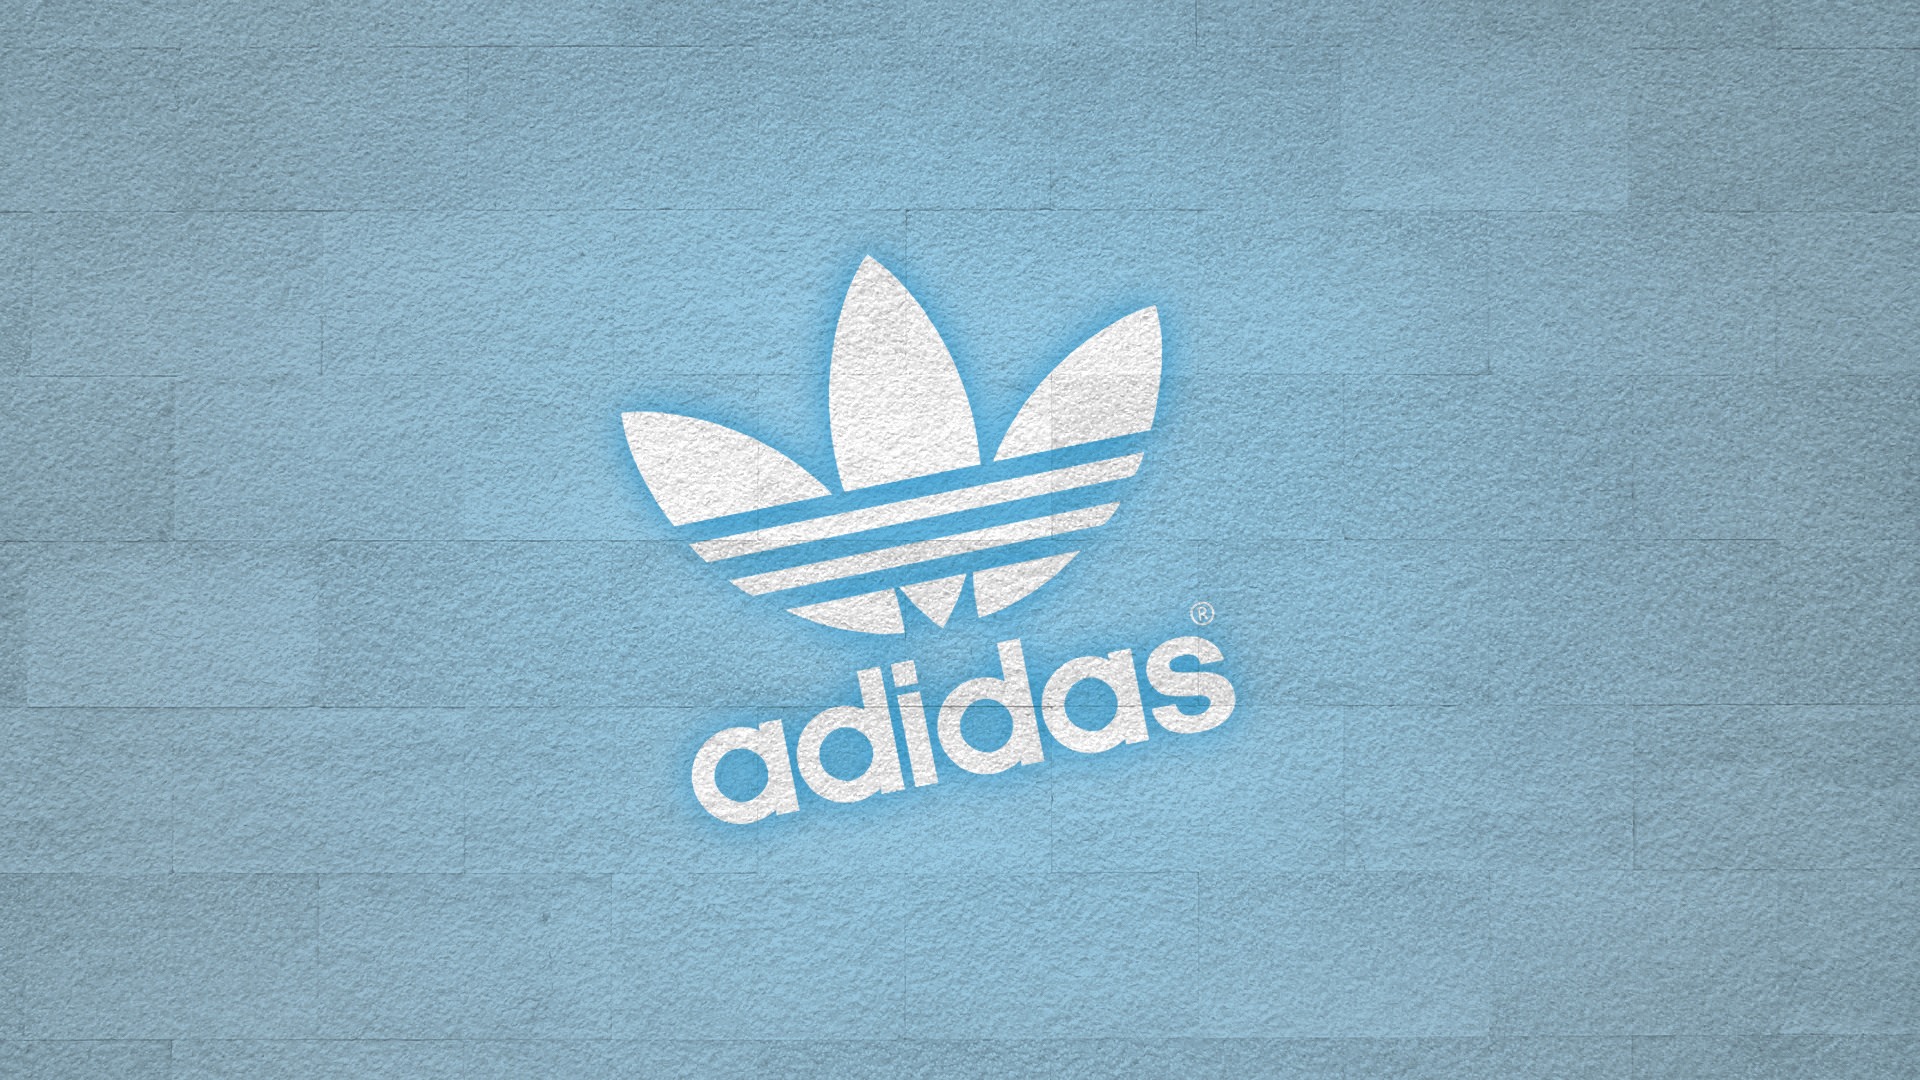 Free Download Adidas HD Wallpaper 1080p Picture Image